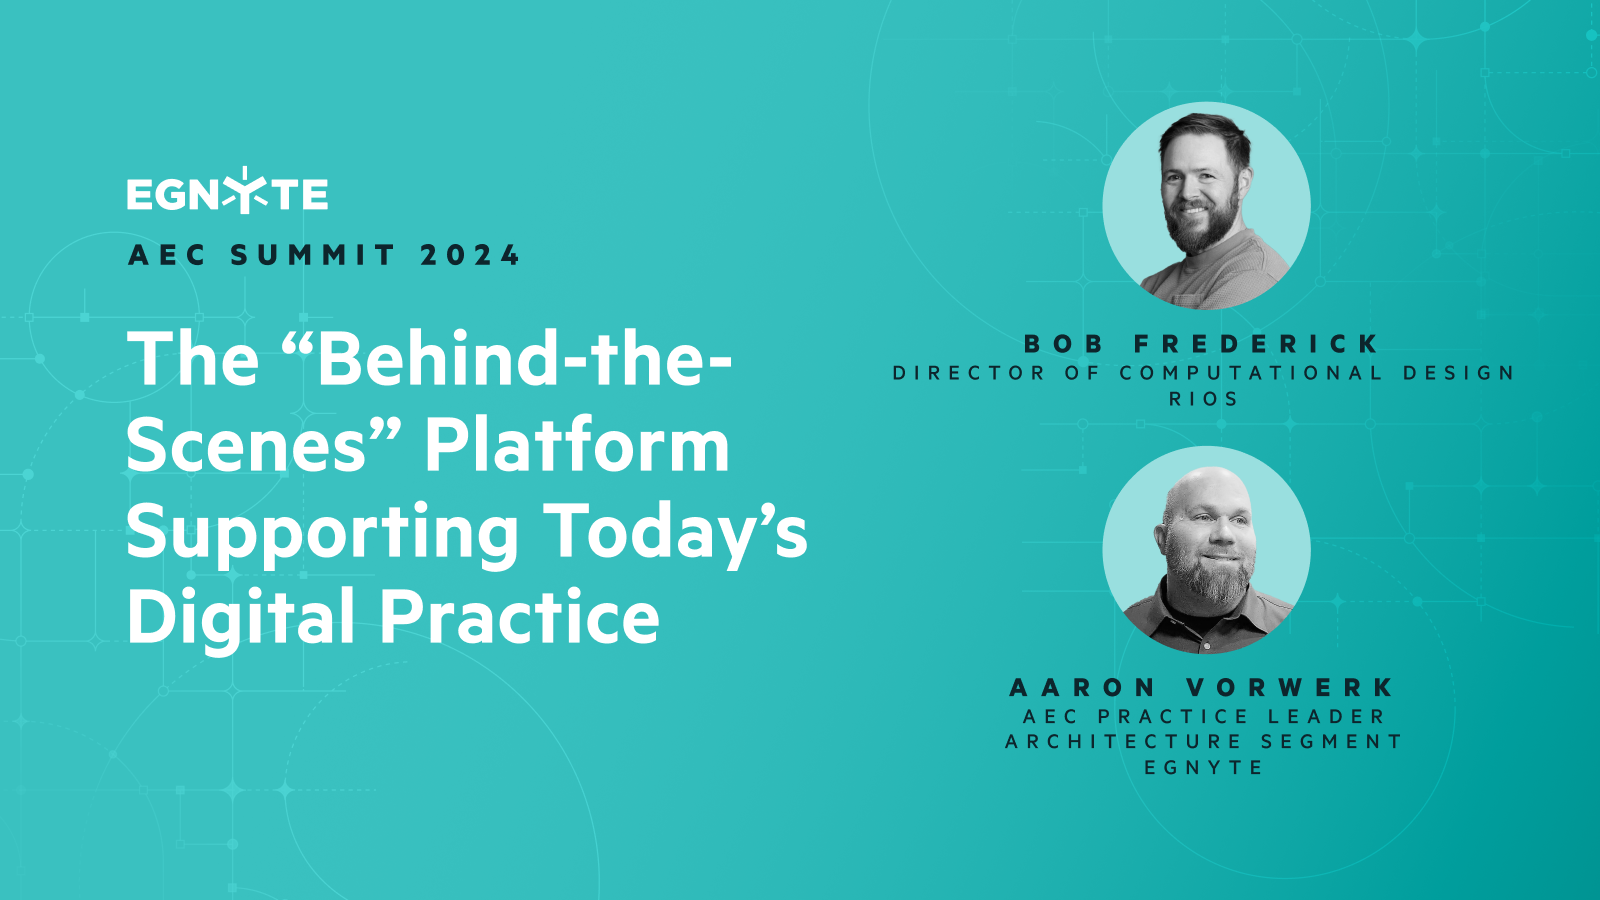 The “Behind-the-Scenes” Platform Supporting Today’s Digital Practice